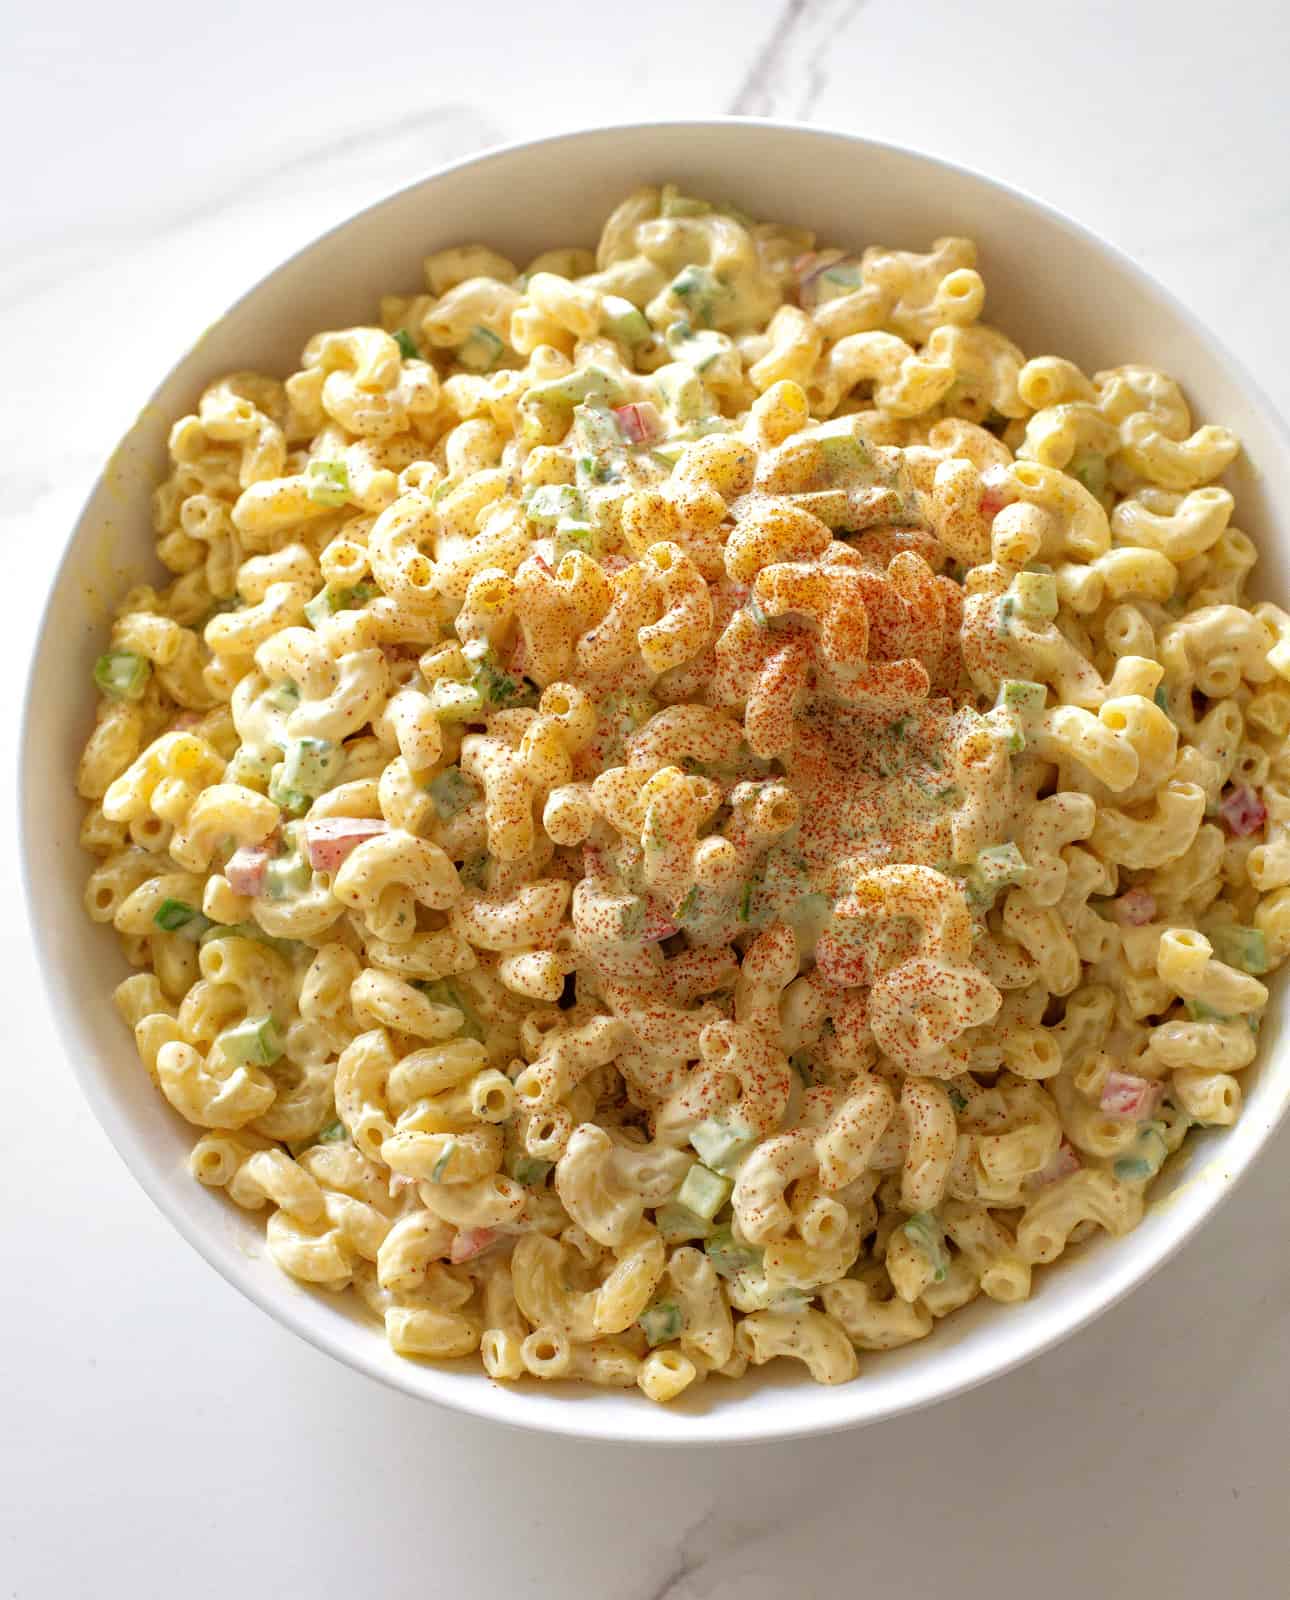 https://www.the-girl-who-ate-everything.com/wp-content/uploads/2022/06/macaroni-salad-30.jpg